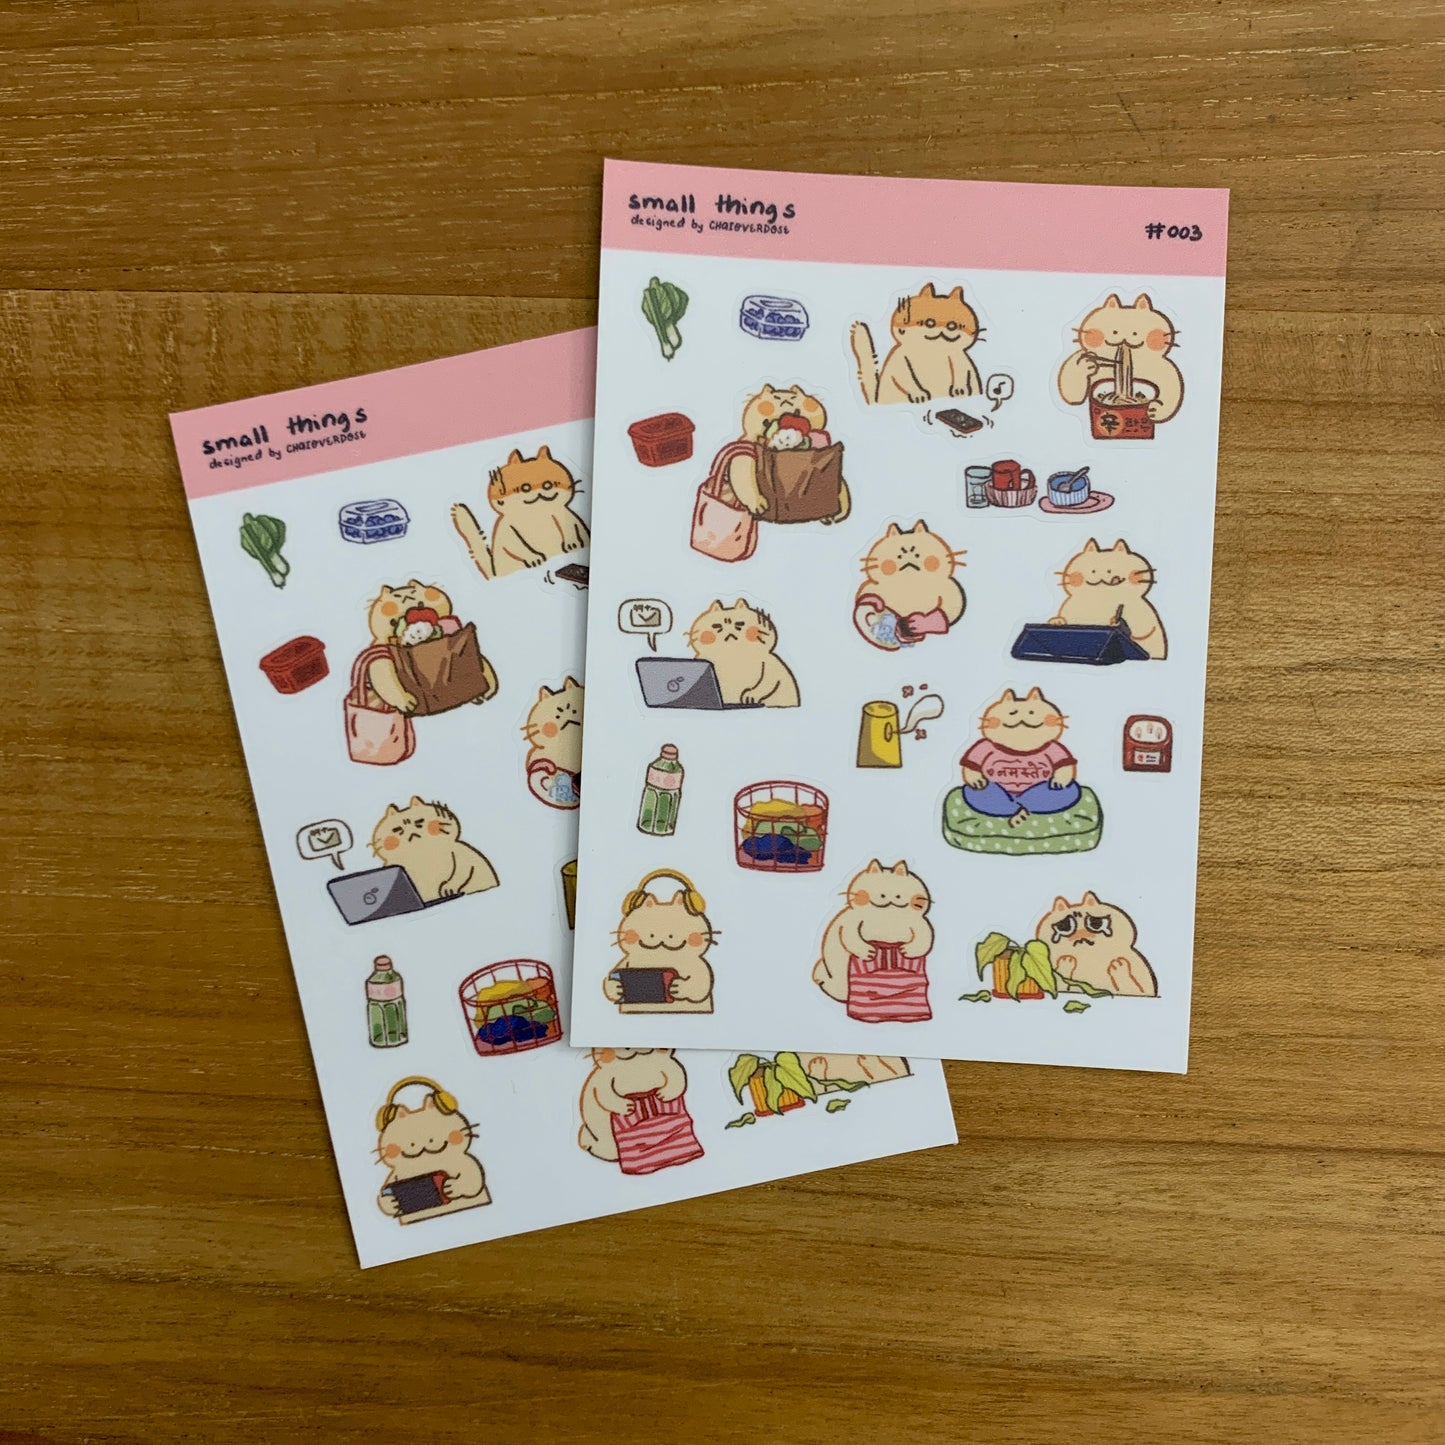 Another Week - Small Things Planner Sticker Sheet #003